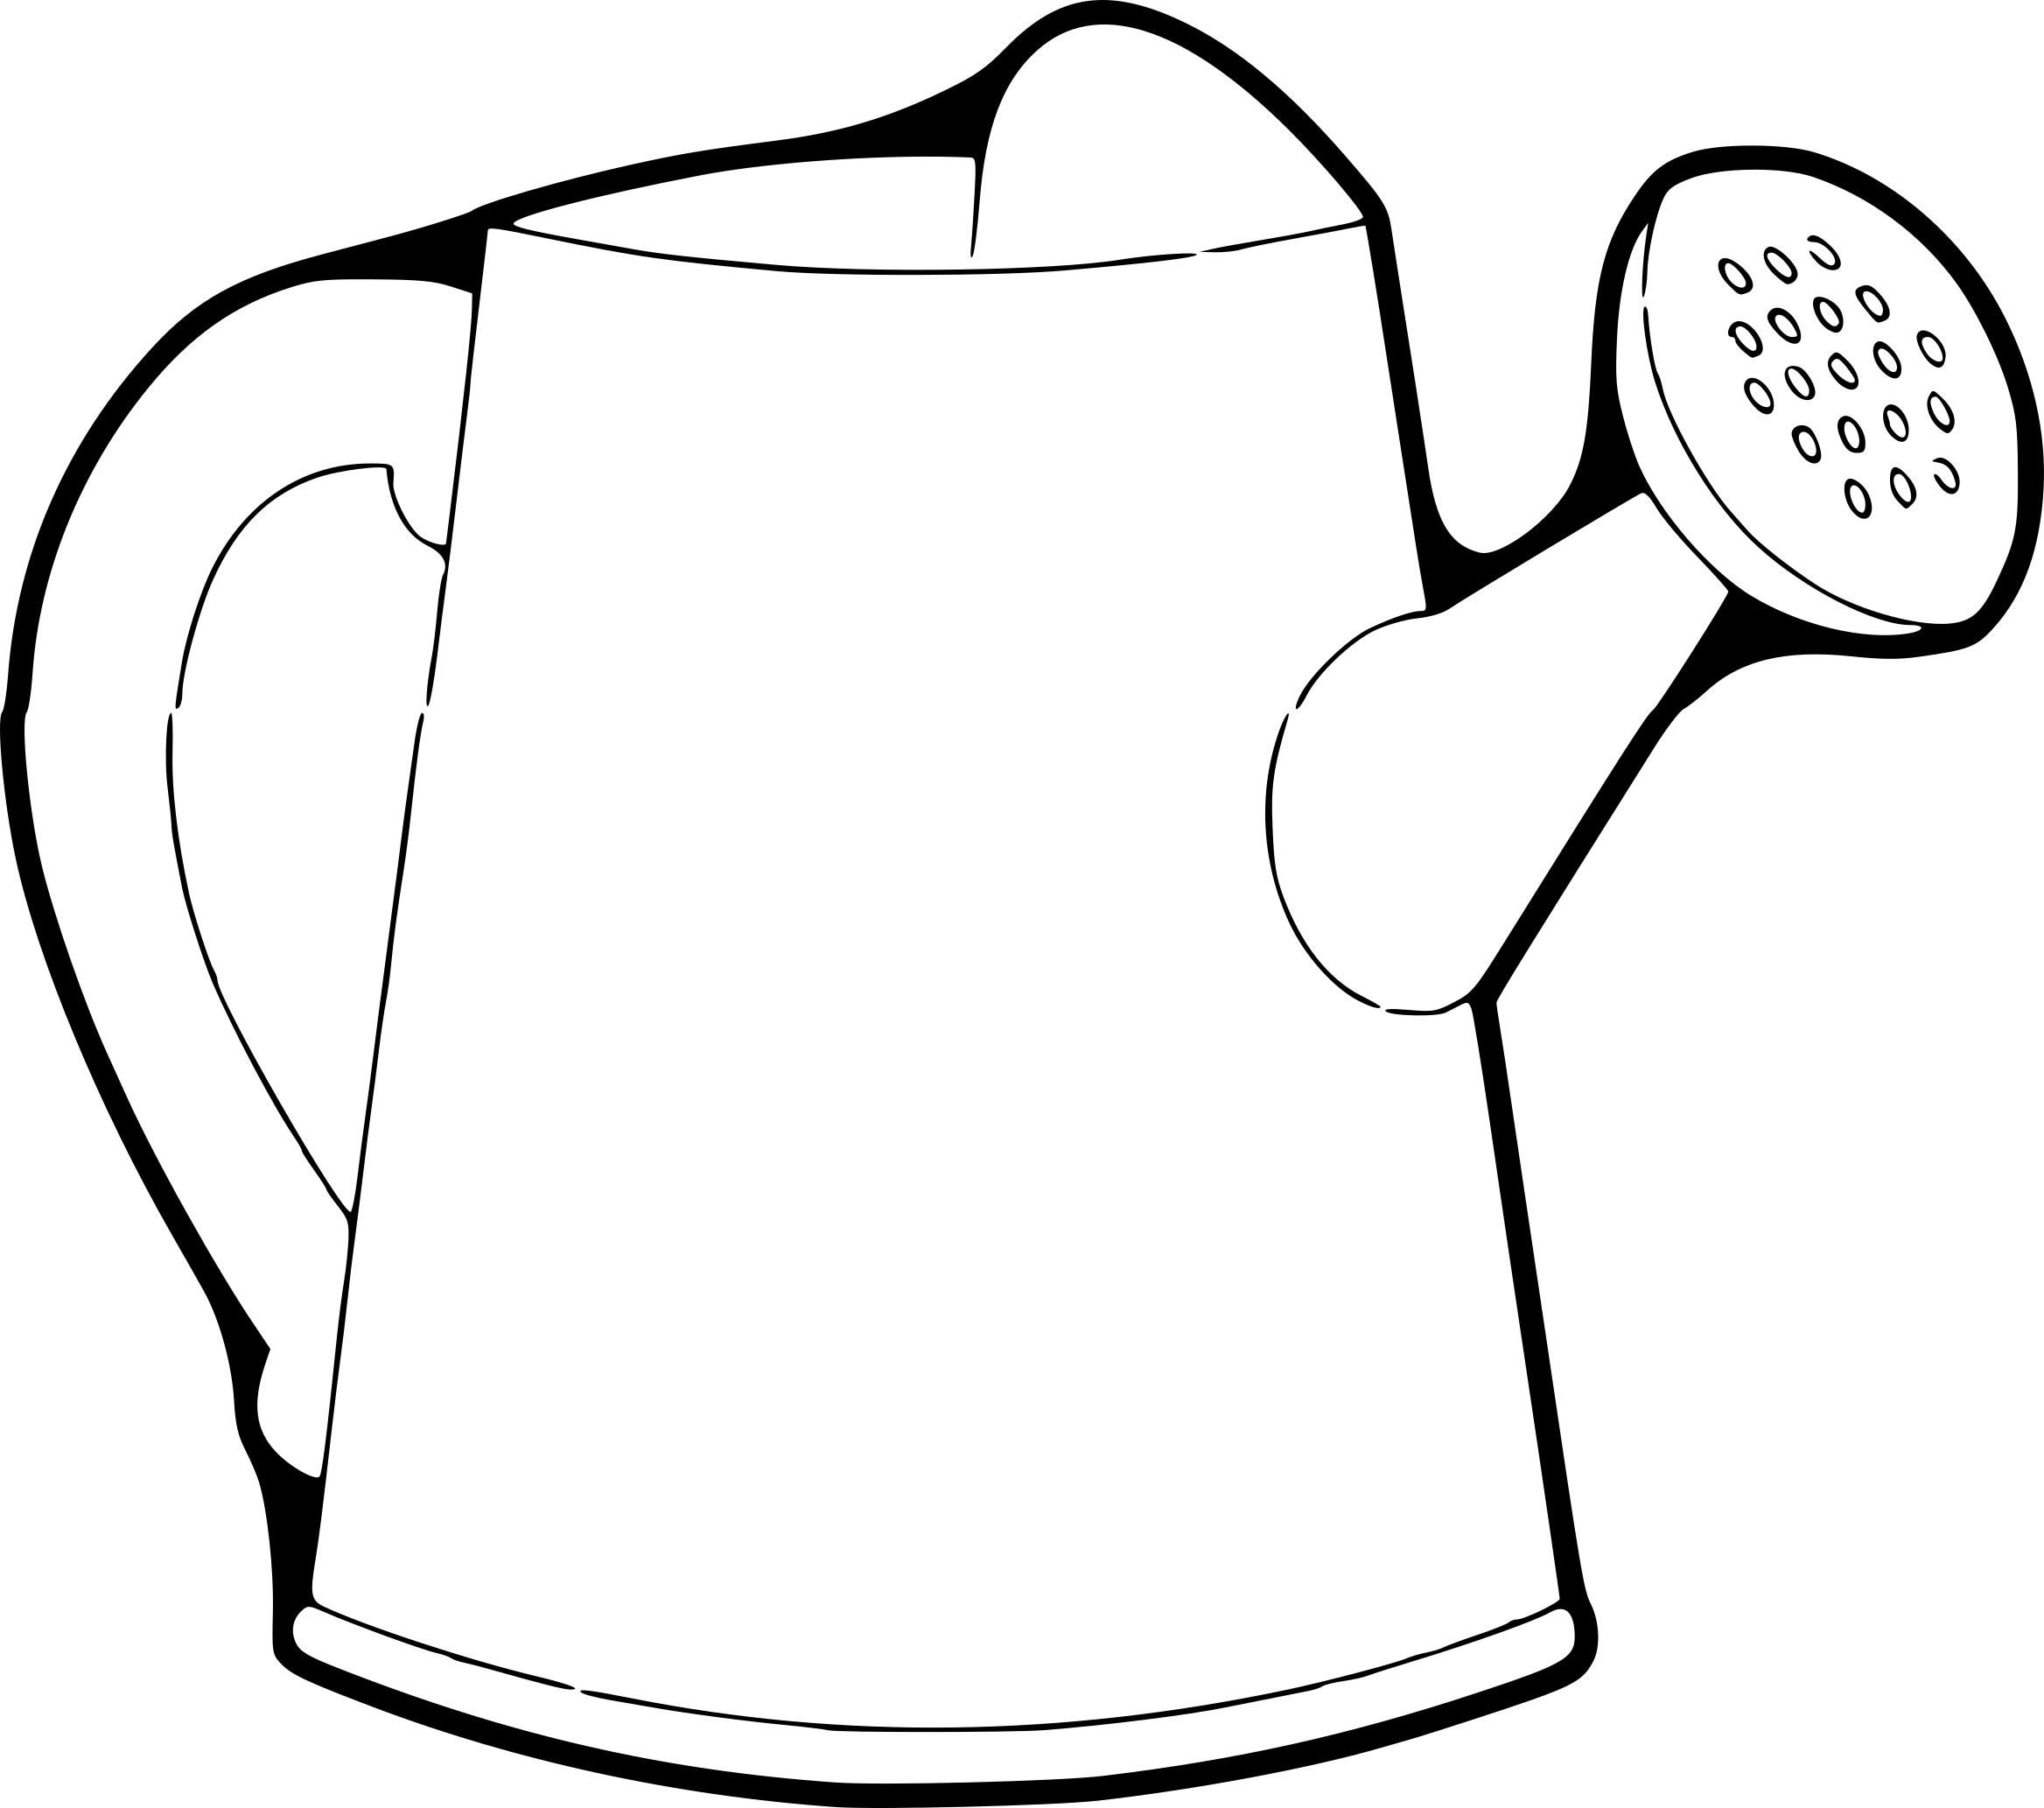 Watering Can drawing and coloring page - free printable coloring pages on  coloori.com